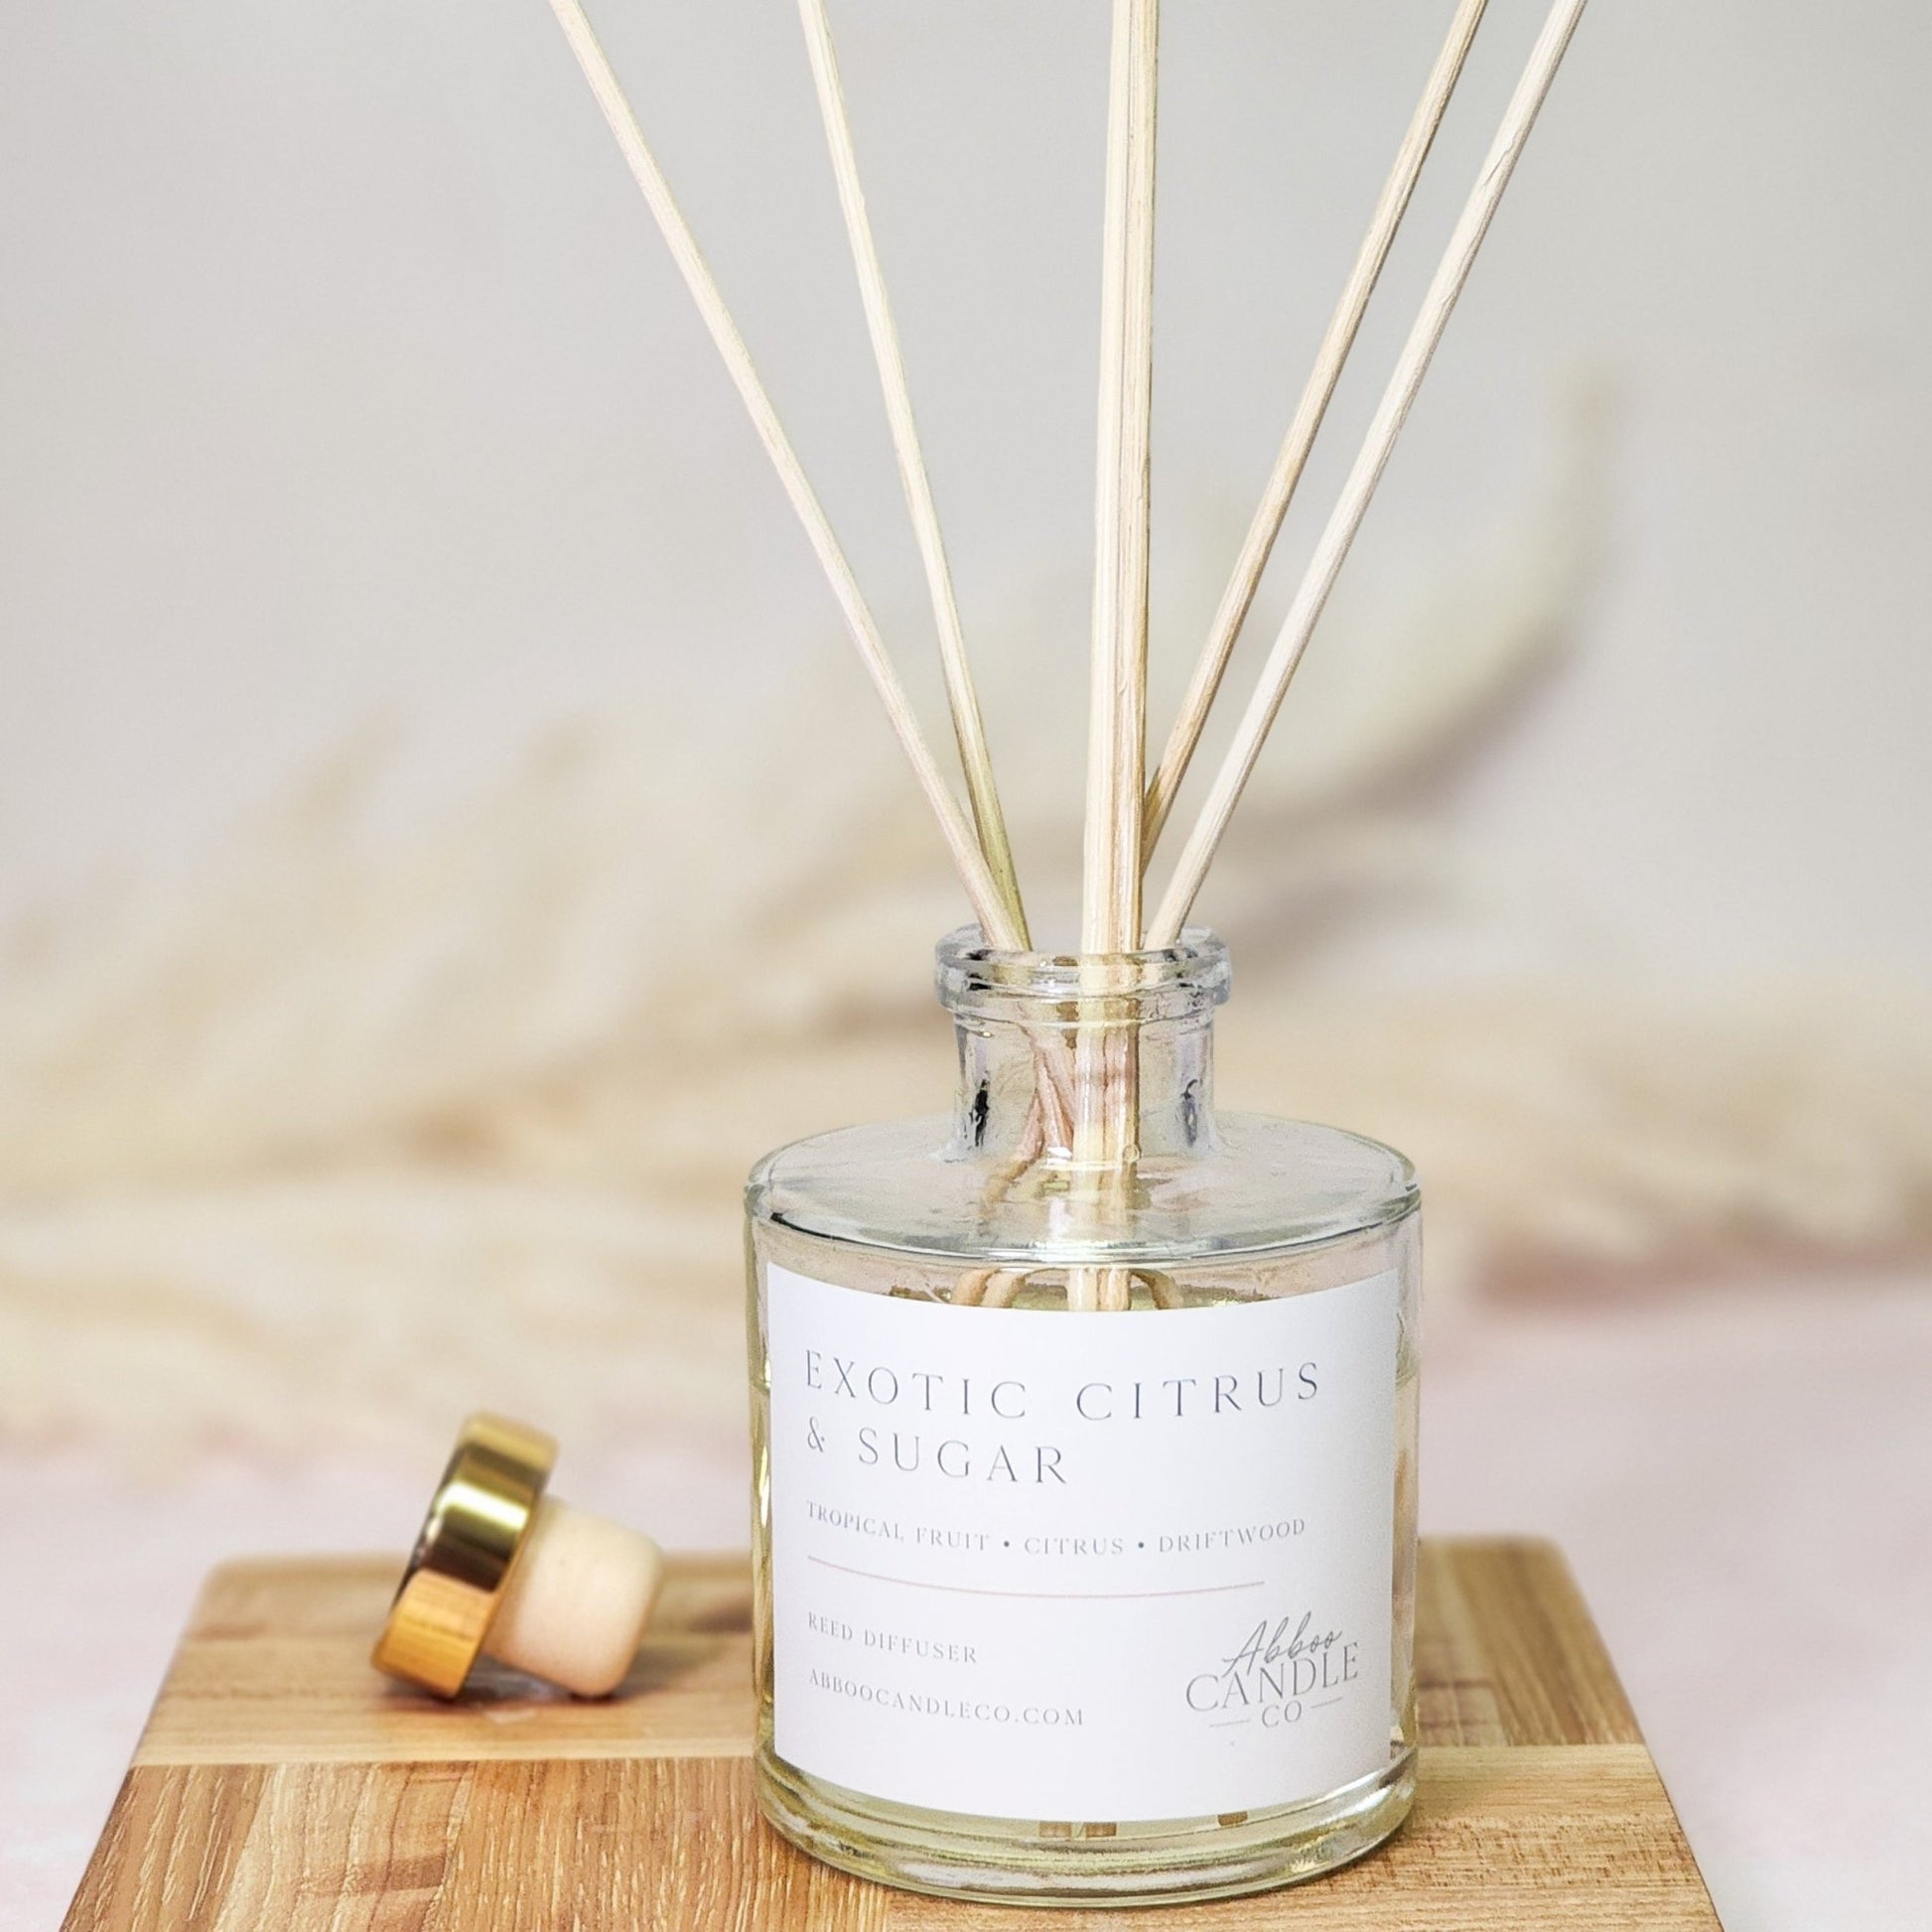 Exotic Citrus and Sugar Reed Diffuser - Abboo Candle Co